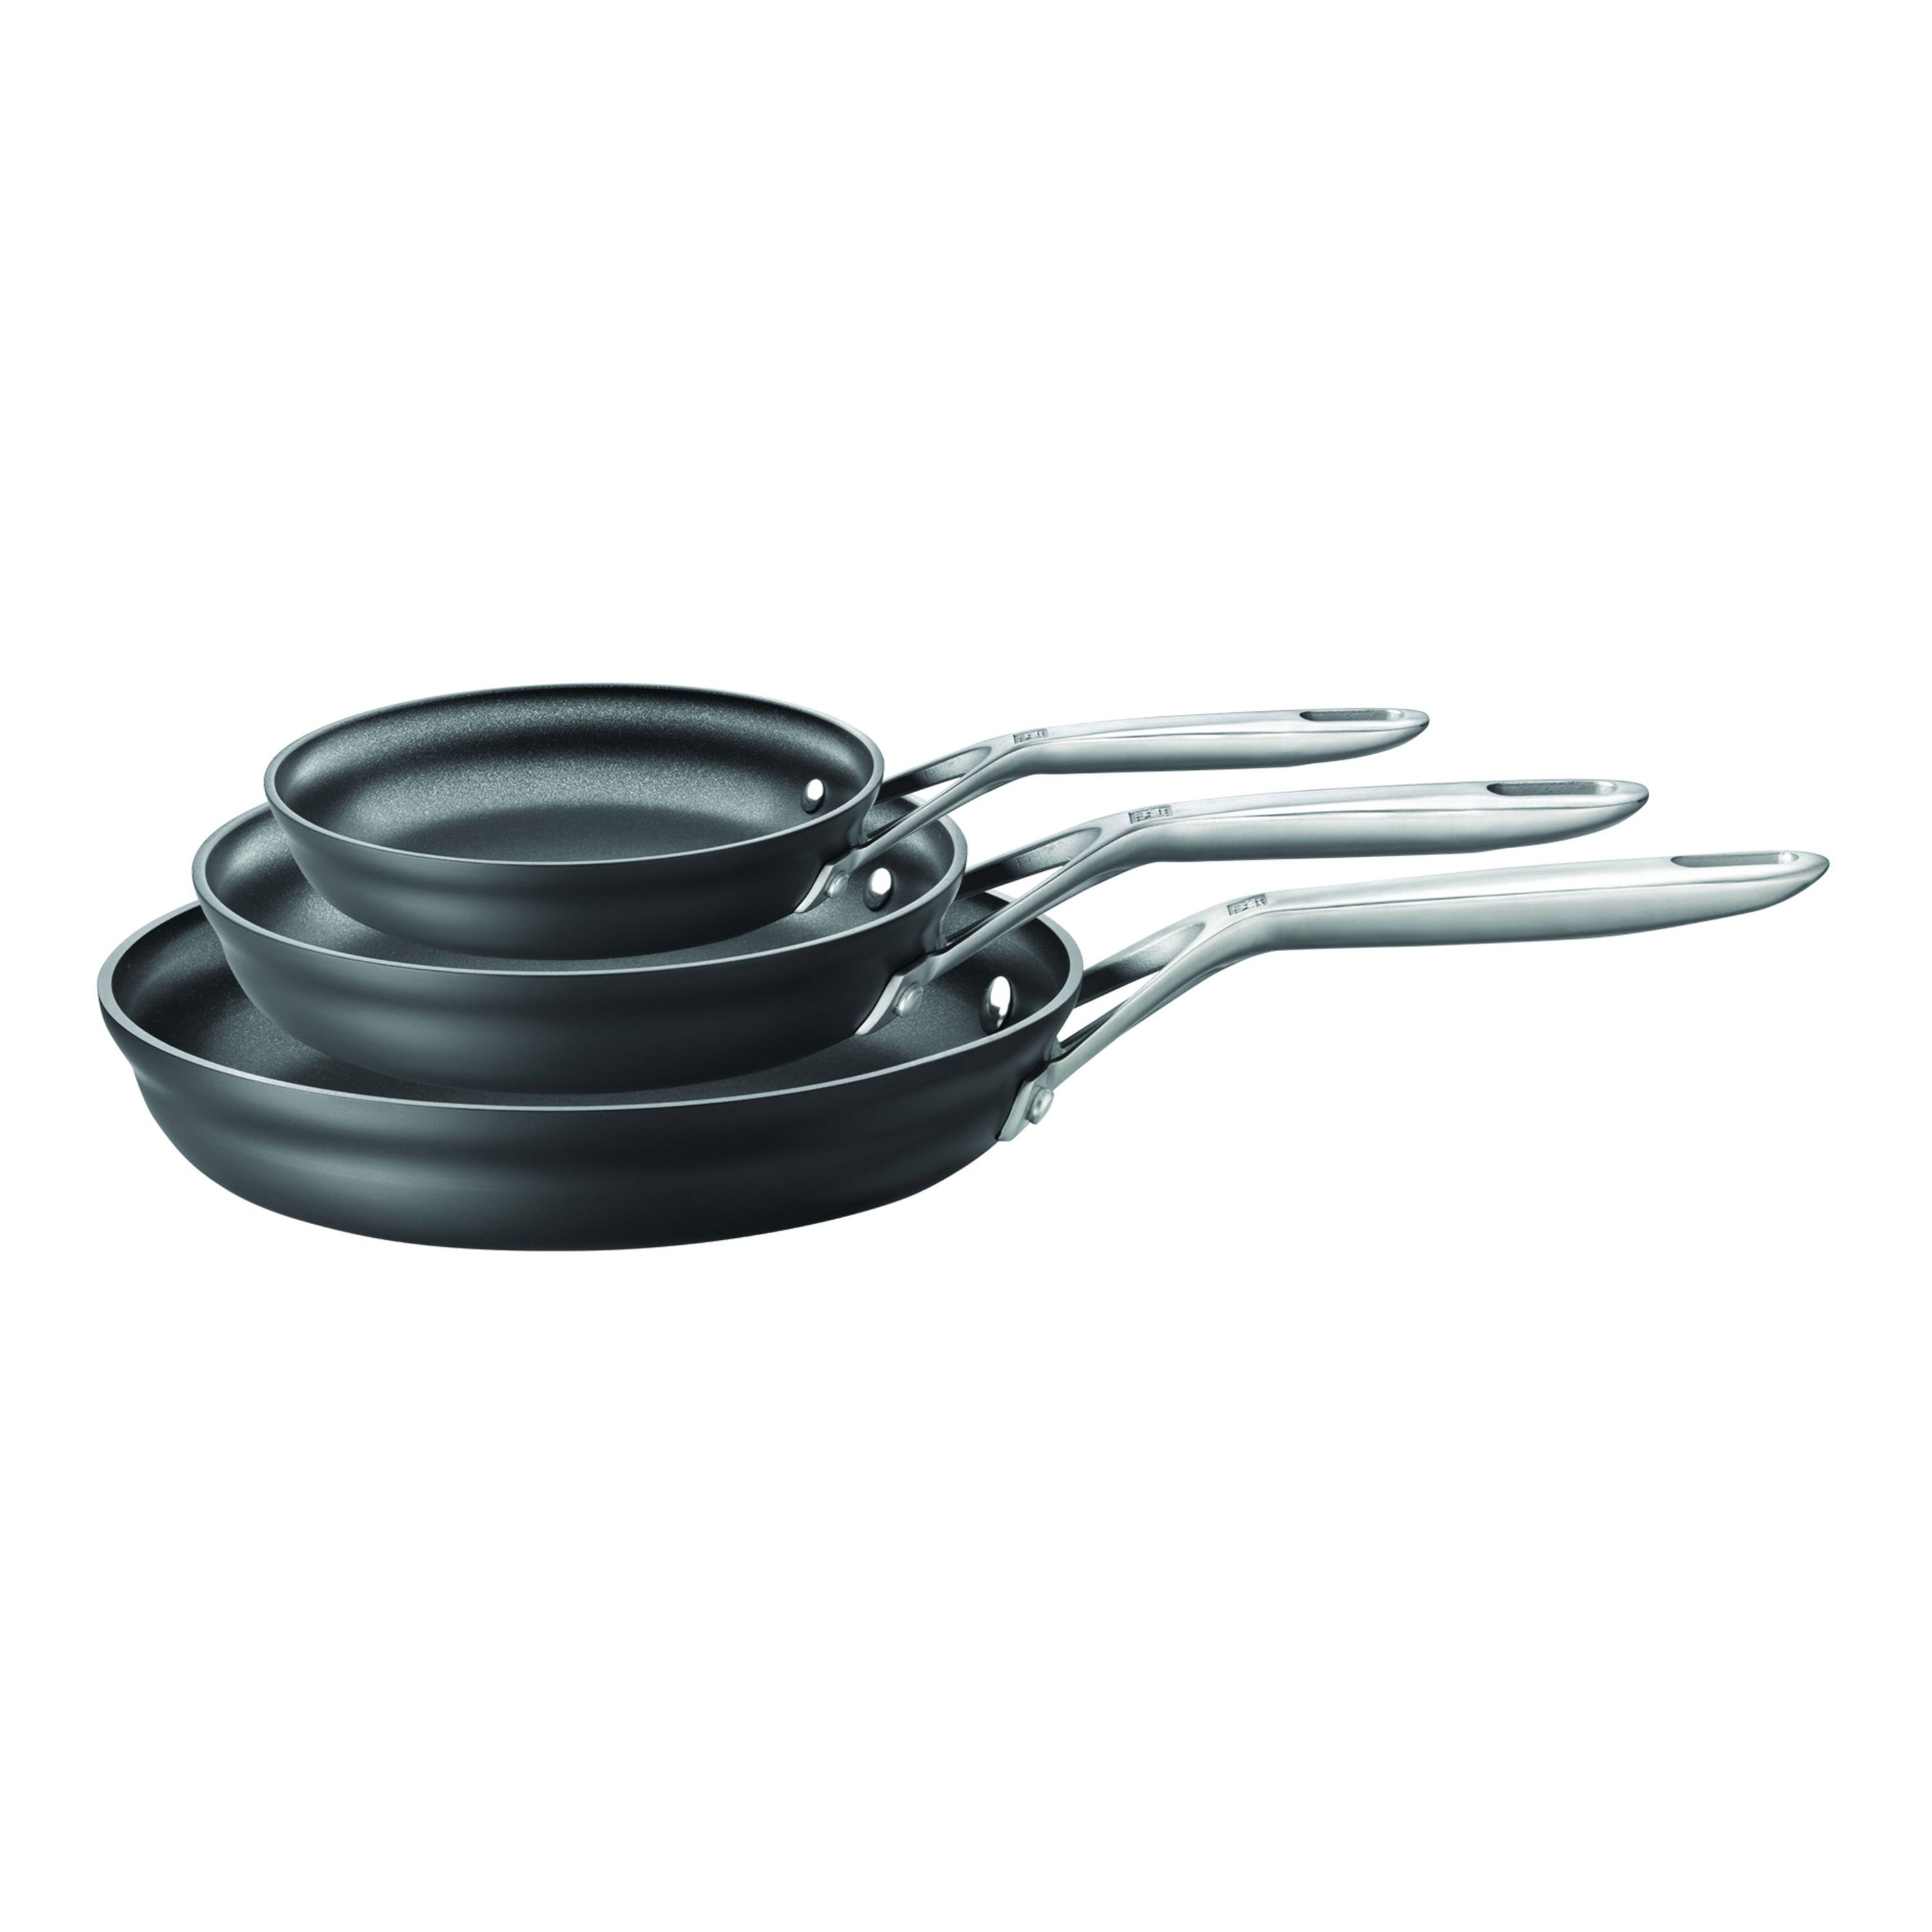 ZWILLING Madura Plus Forged Aluminum Nonstick Fry Pan - Bed Bath